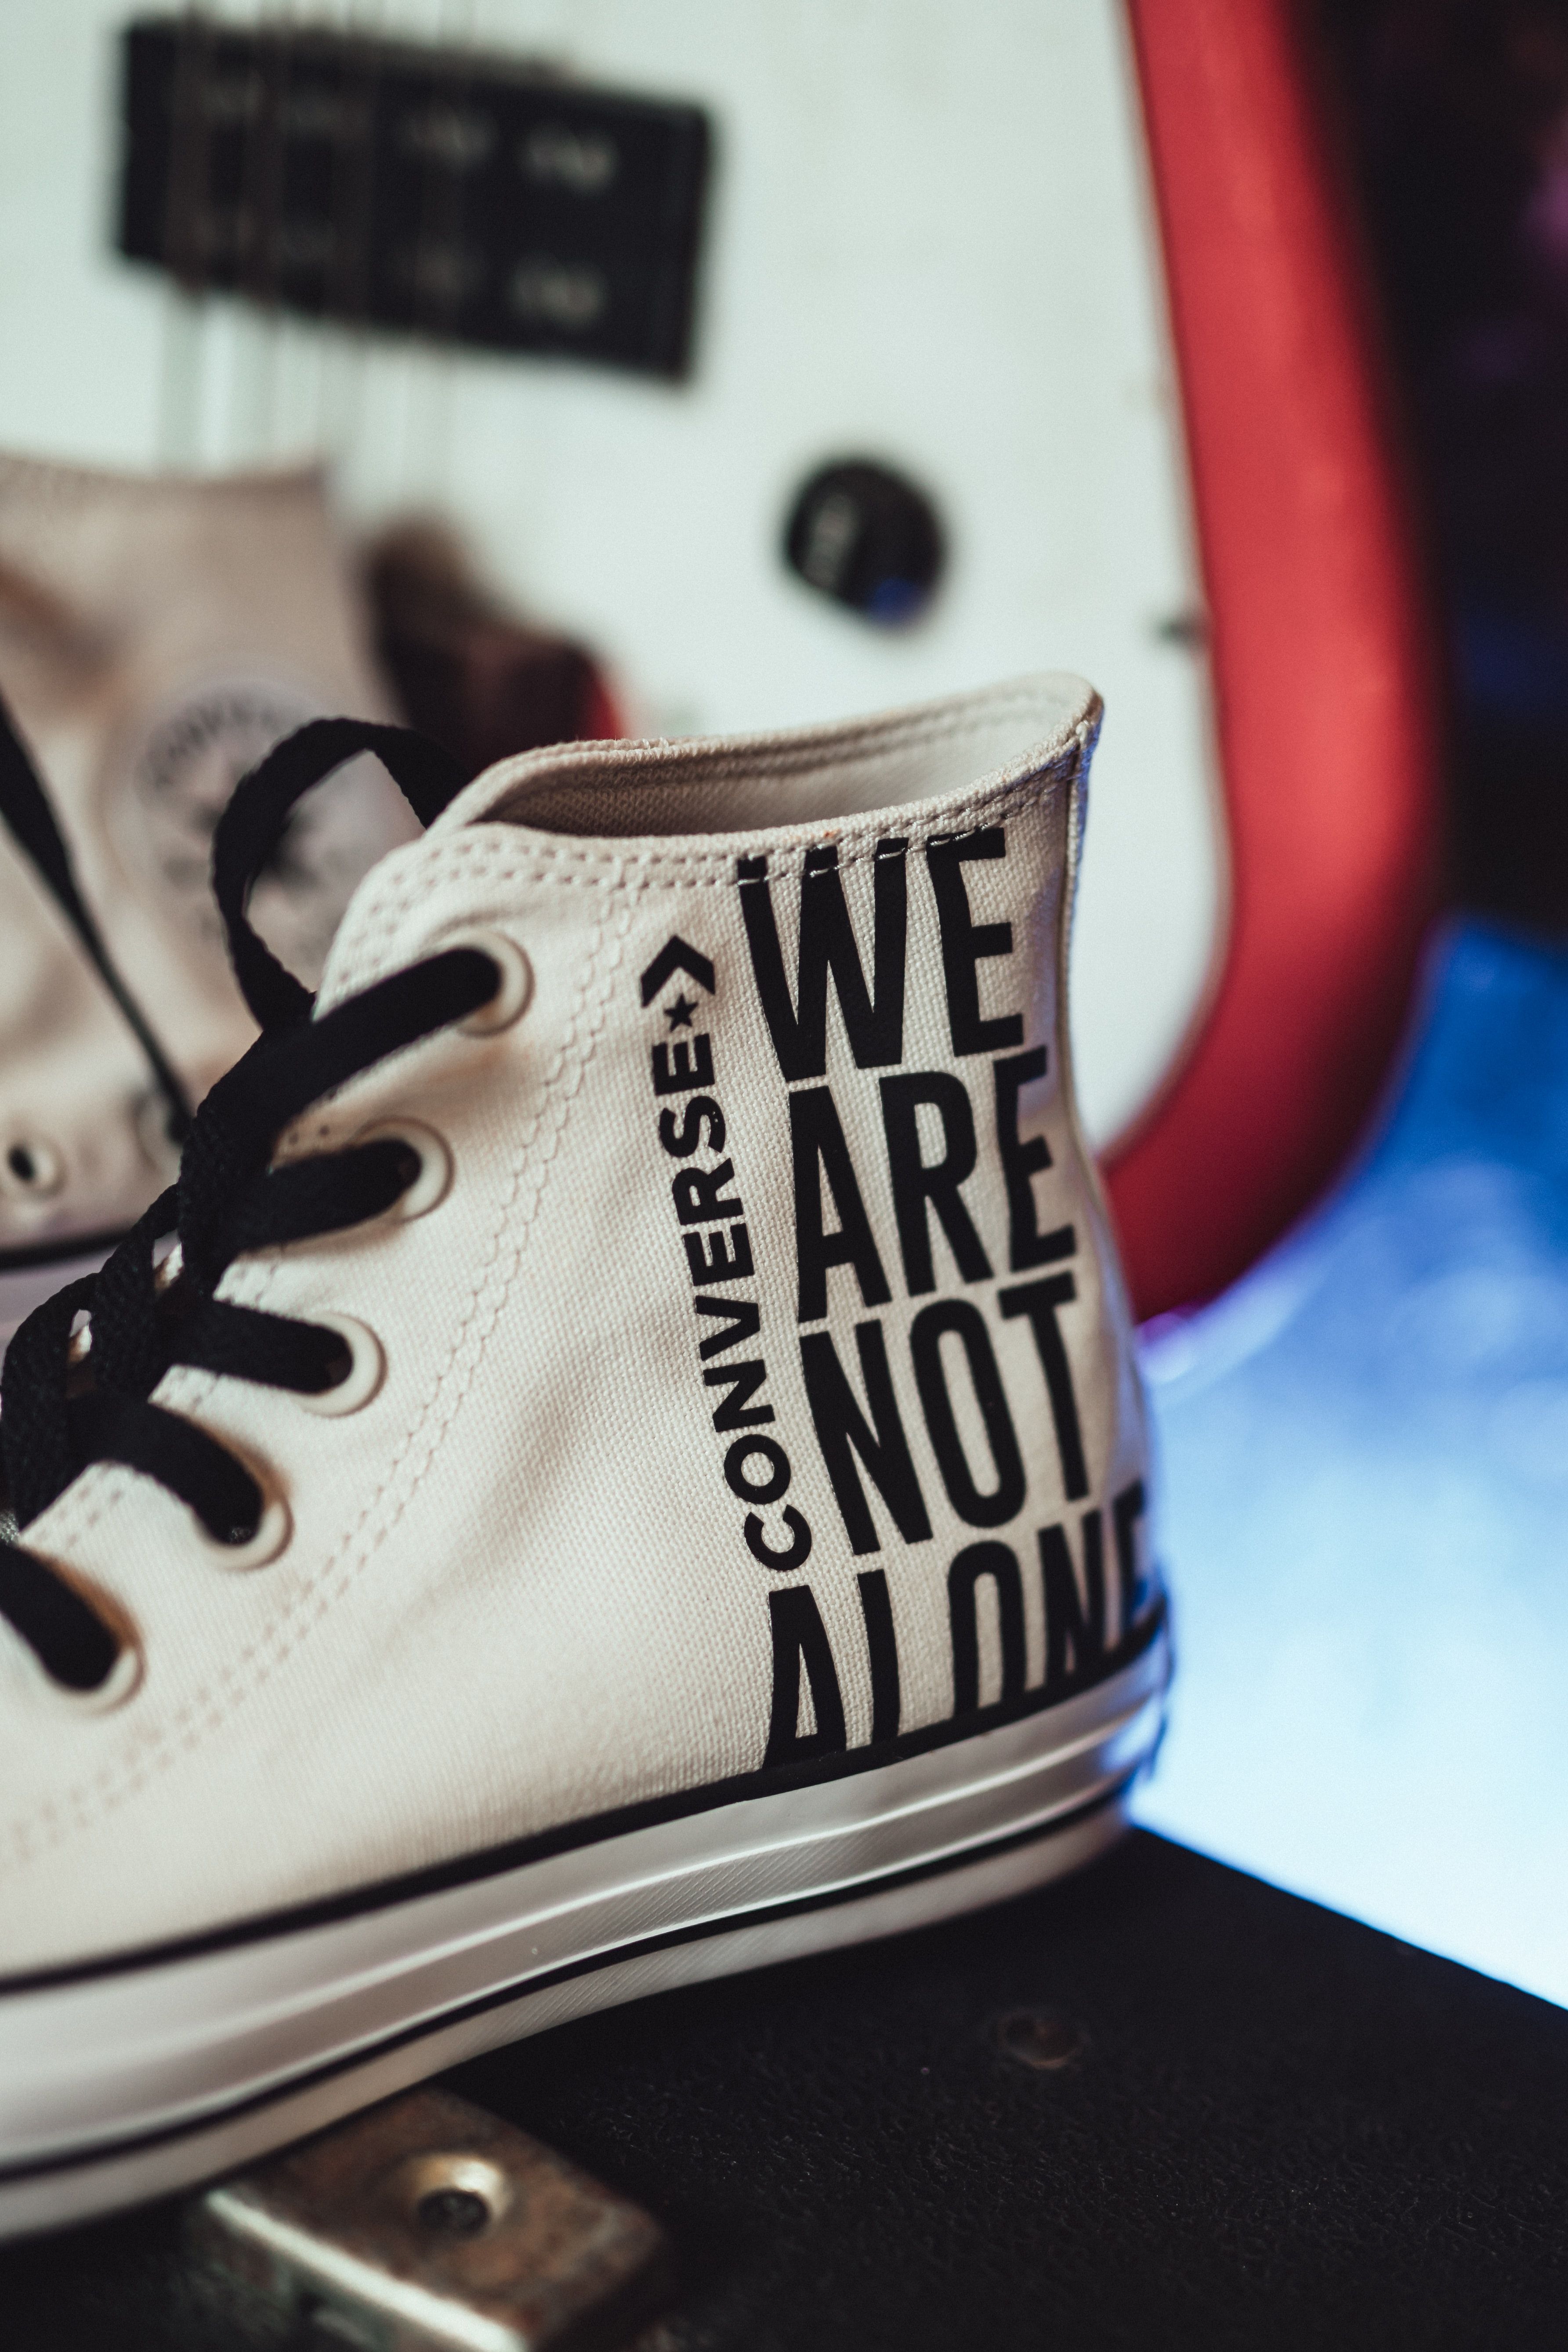 Converse All Star Picture. Download Free Image